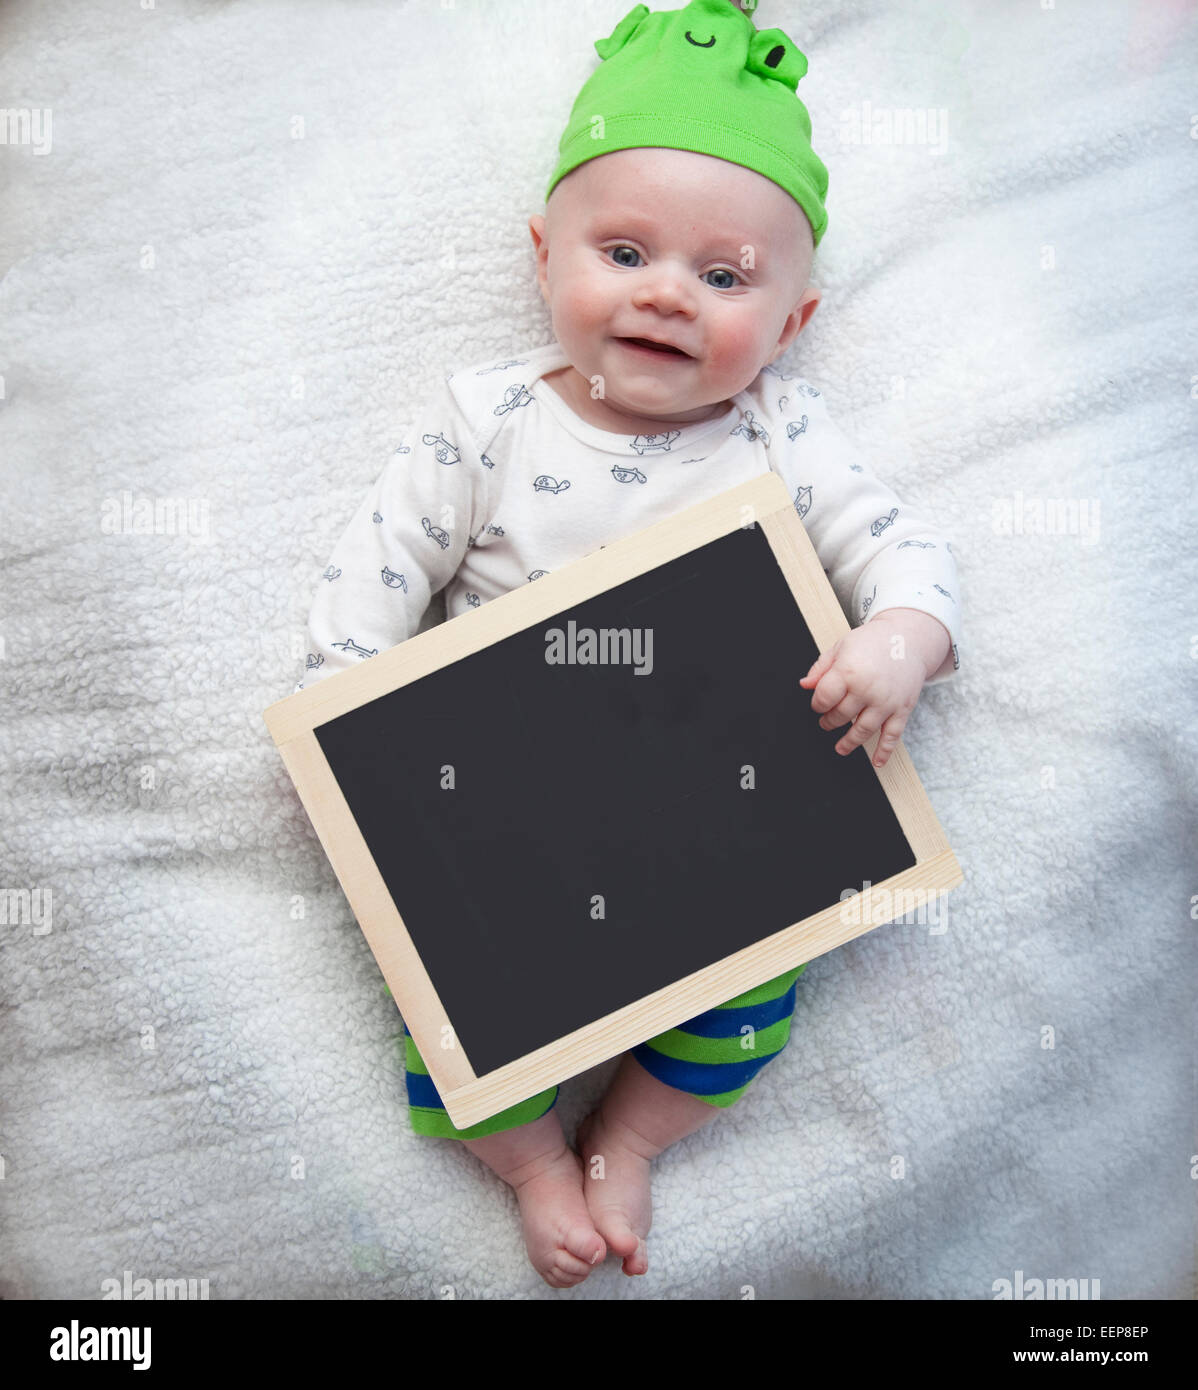 Smiling blue eyed baby boy holding a chalkboard Banque D'Images